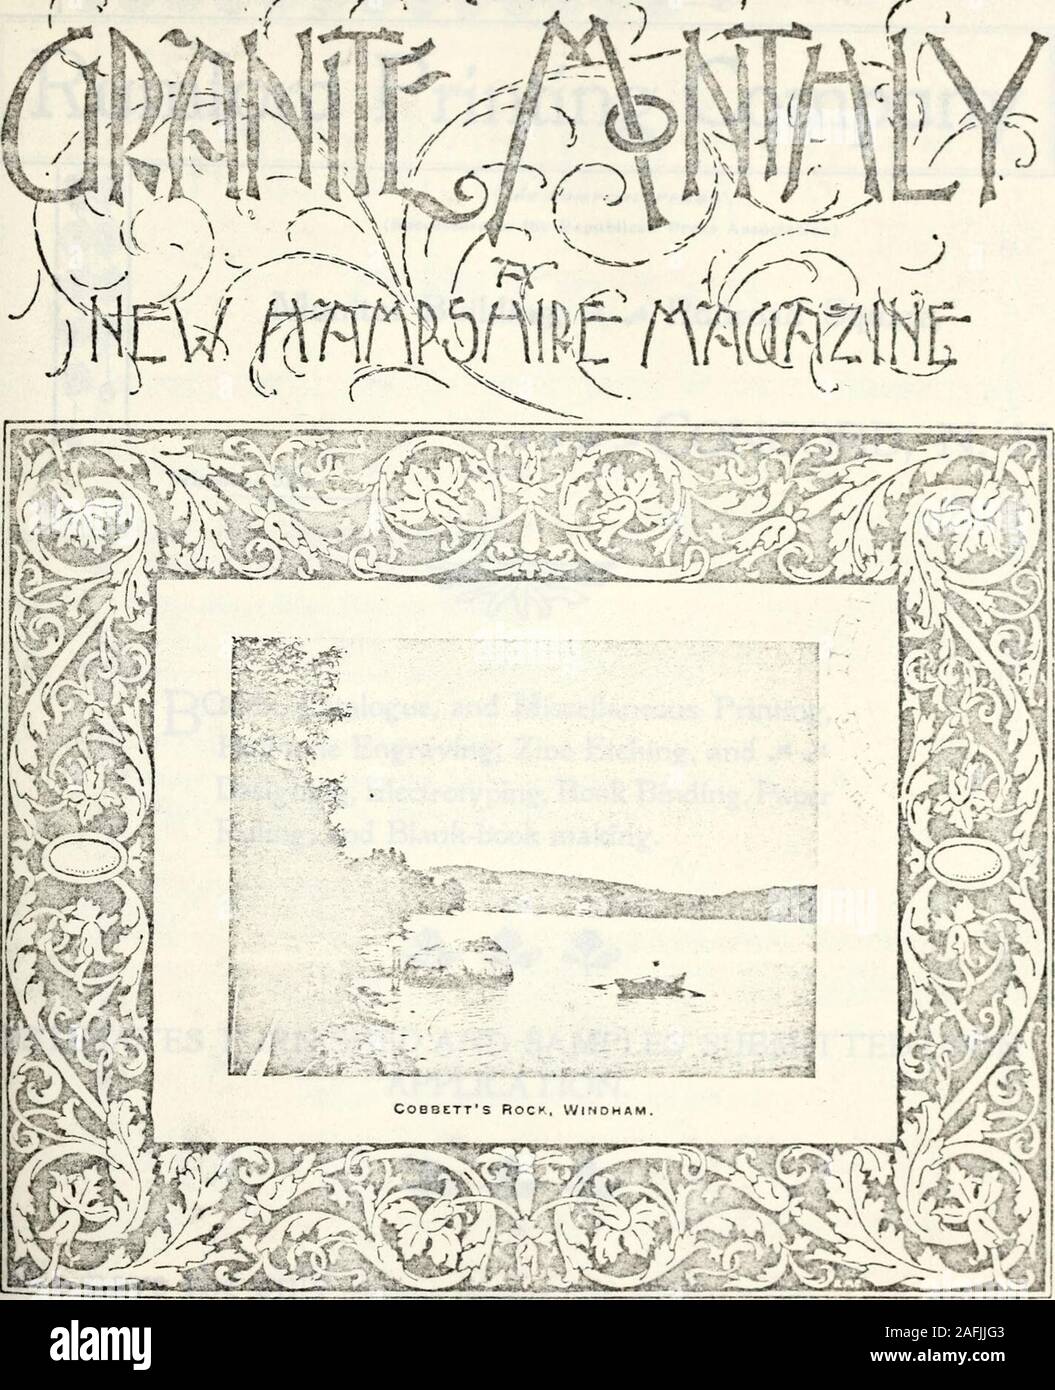 . The Granite monthly : a magazine of literature, history and state progress. ;--v.: ? . / i; i. 1898 The i - &lt; ^ * | . -;.«, ^ §r—^ Rumford Printing Company if ^ P §i r / (the rumford press),(Successors to th&lt;.- Republican Press Association Monitor Building, *&lt; ,&lt; Railroad Square, **** Concord, n. h. Telephone 52-2. m TDOOK, Catalogue, and Miscellaneous Printing,Half-tone Engraving, Zinc Etching, and ^ &lt;*•Designing, Electrotyping, Book Binding, PaperRuling, and Blank-book making. ^^^ ESTIMATES FURNISHED AND SAMPLES SUBMITTED UPON APPLICATION. & -fr & W C naVC LllC Only complete Stock Photo